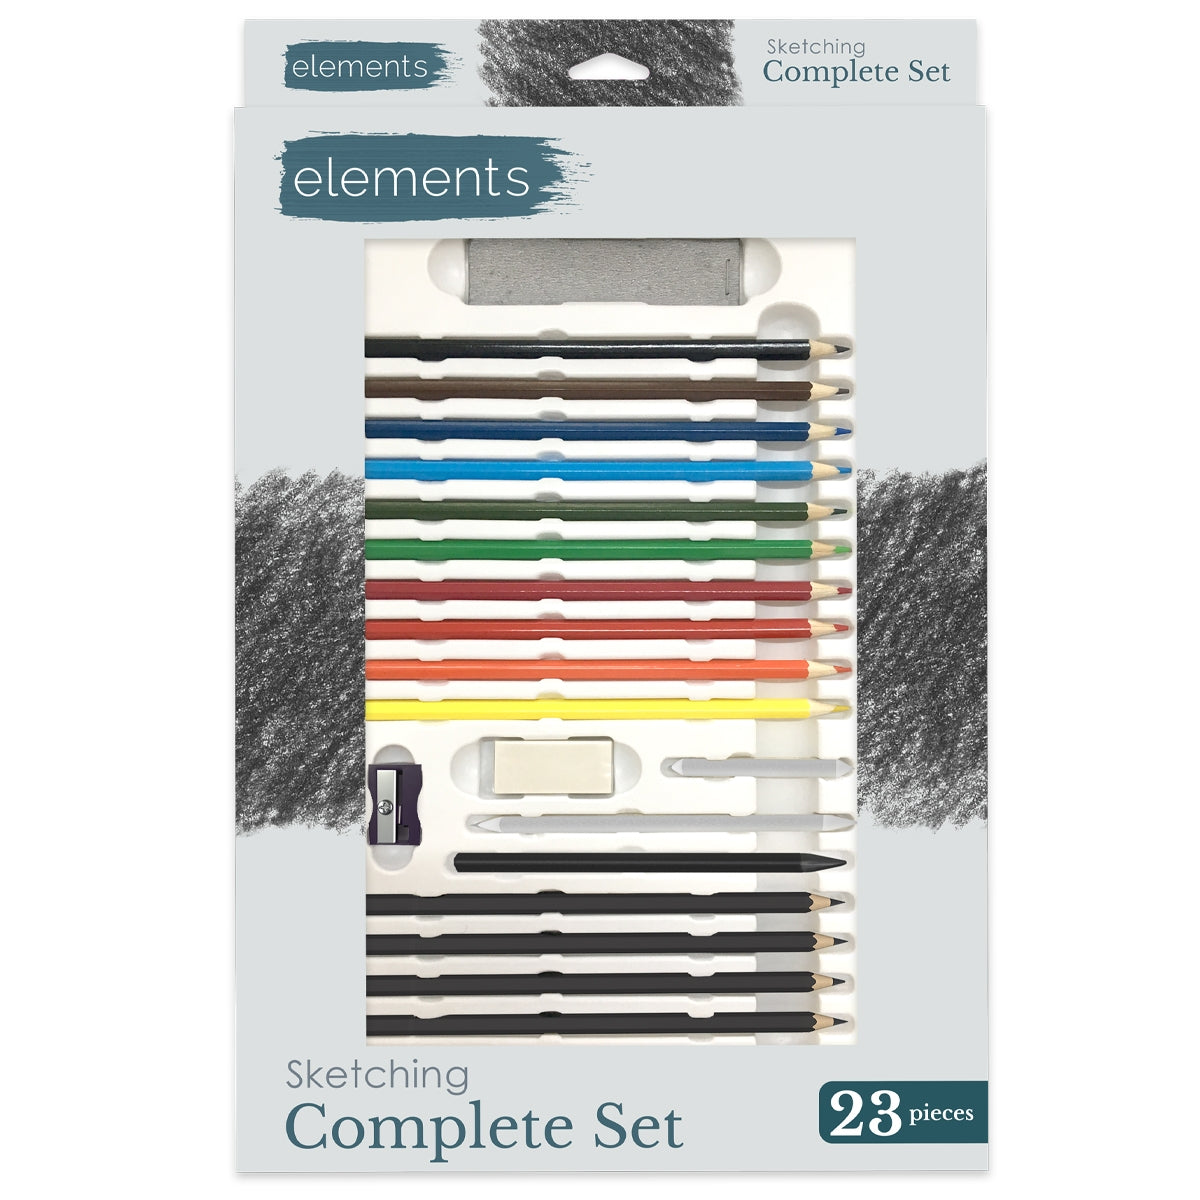 Elements Complete Drawing & Sketching Pencil Set - 23 Piece